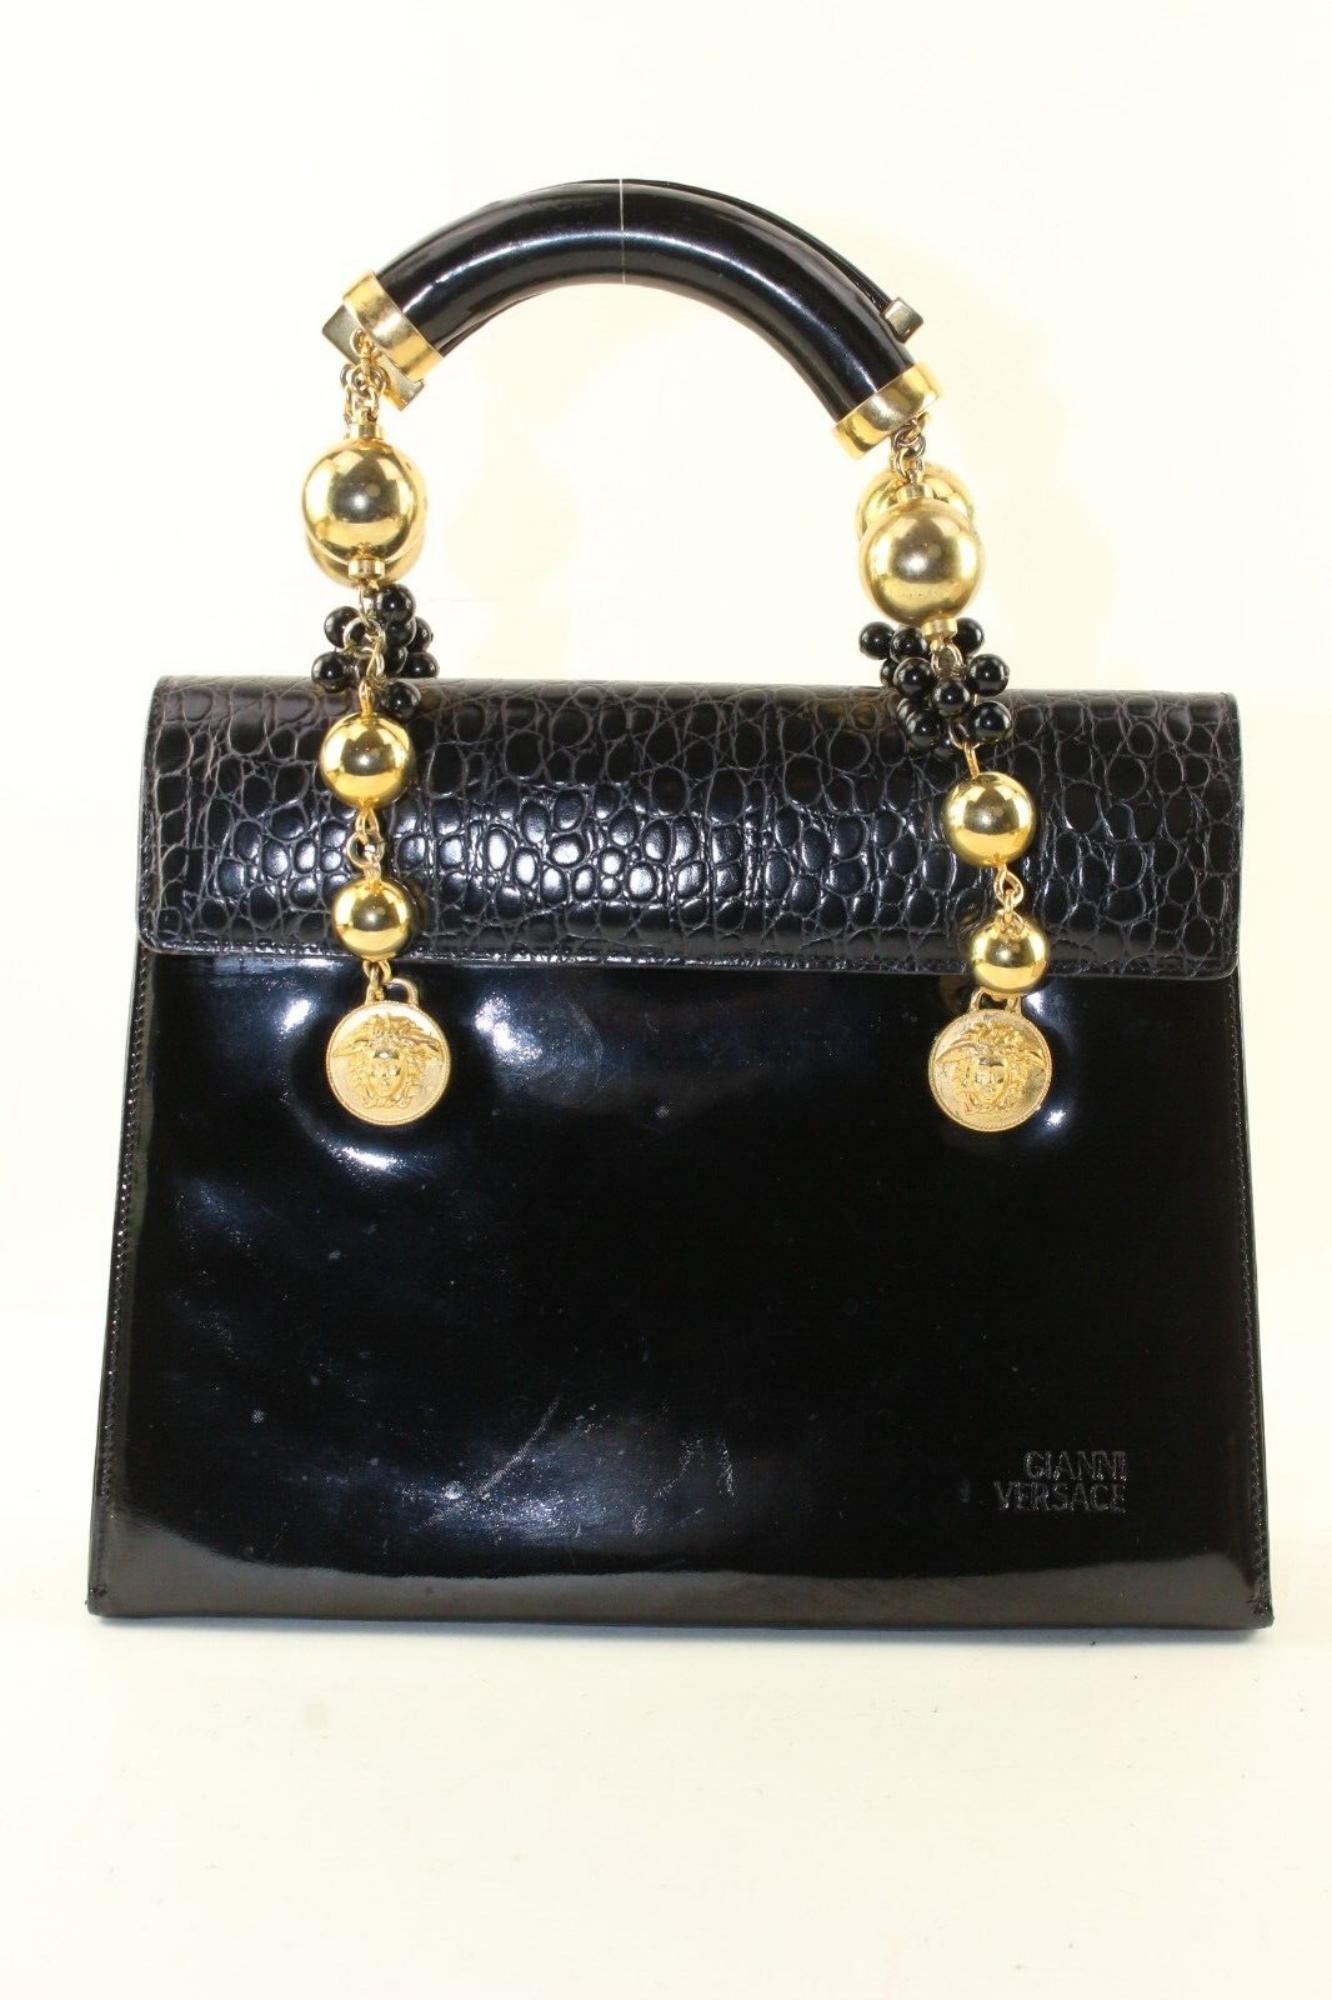 VERSACE Emobssed Croc GHW Satchel Rare 3VER1219K In Good Condition For Sale In Dix hills, NY